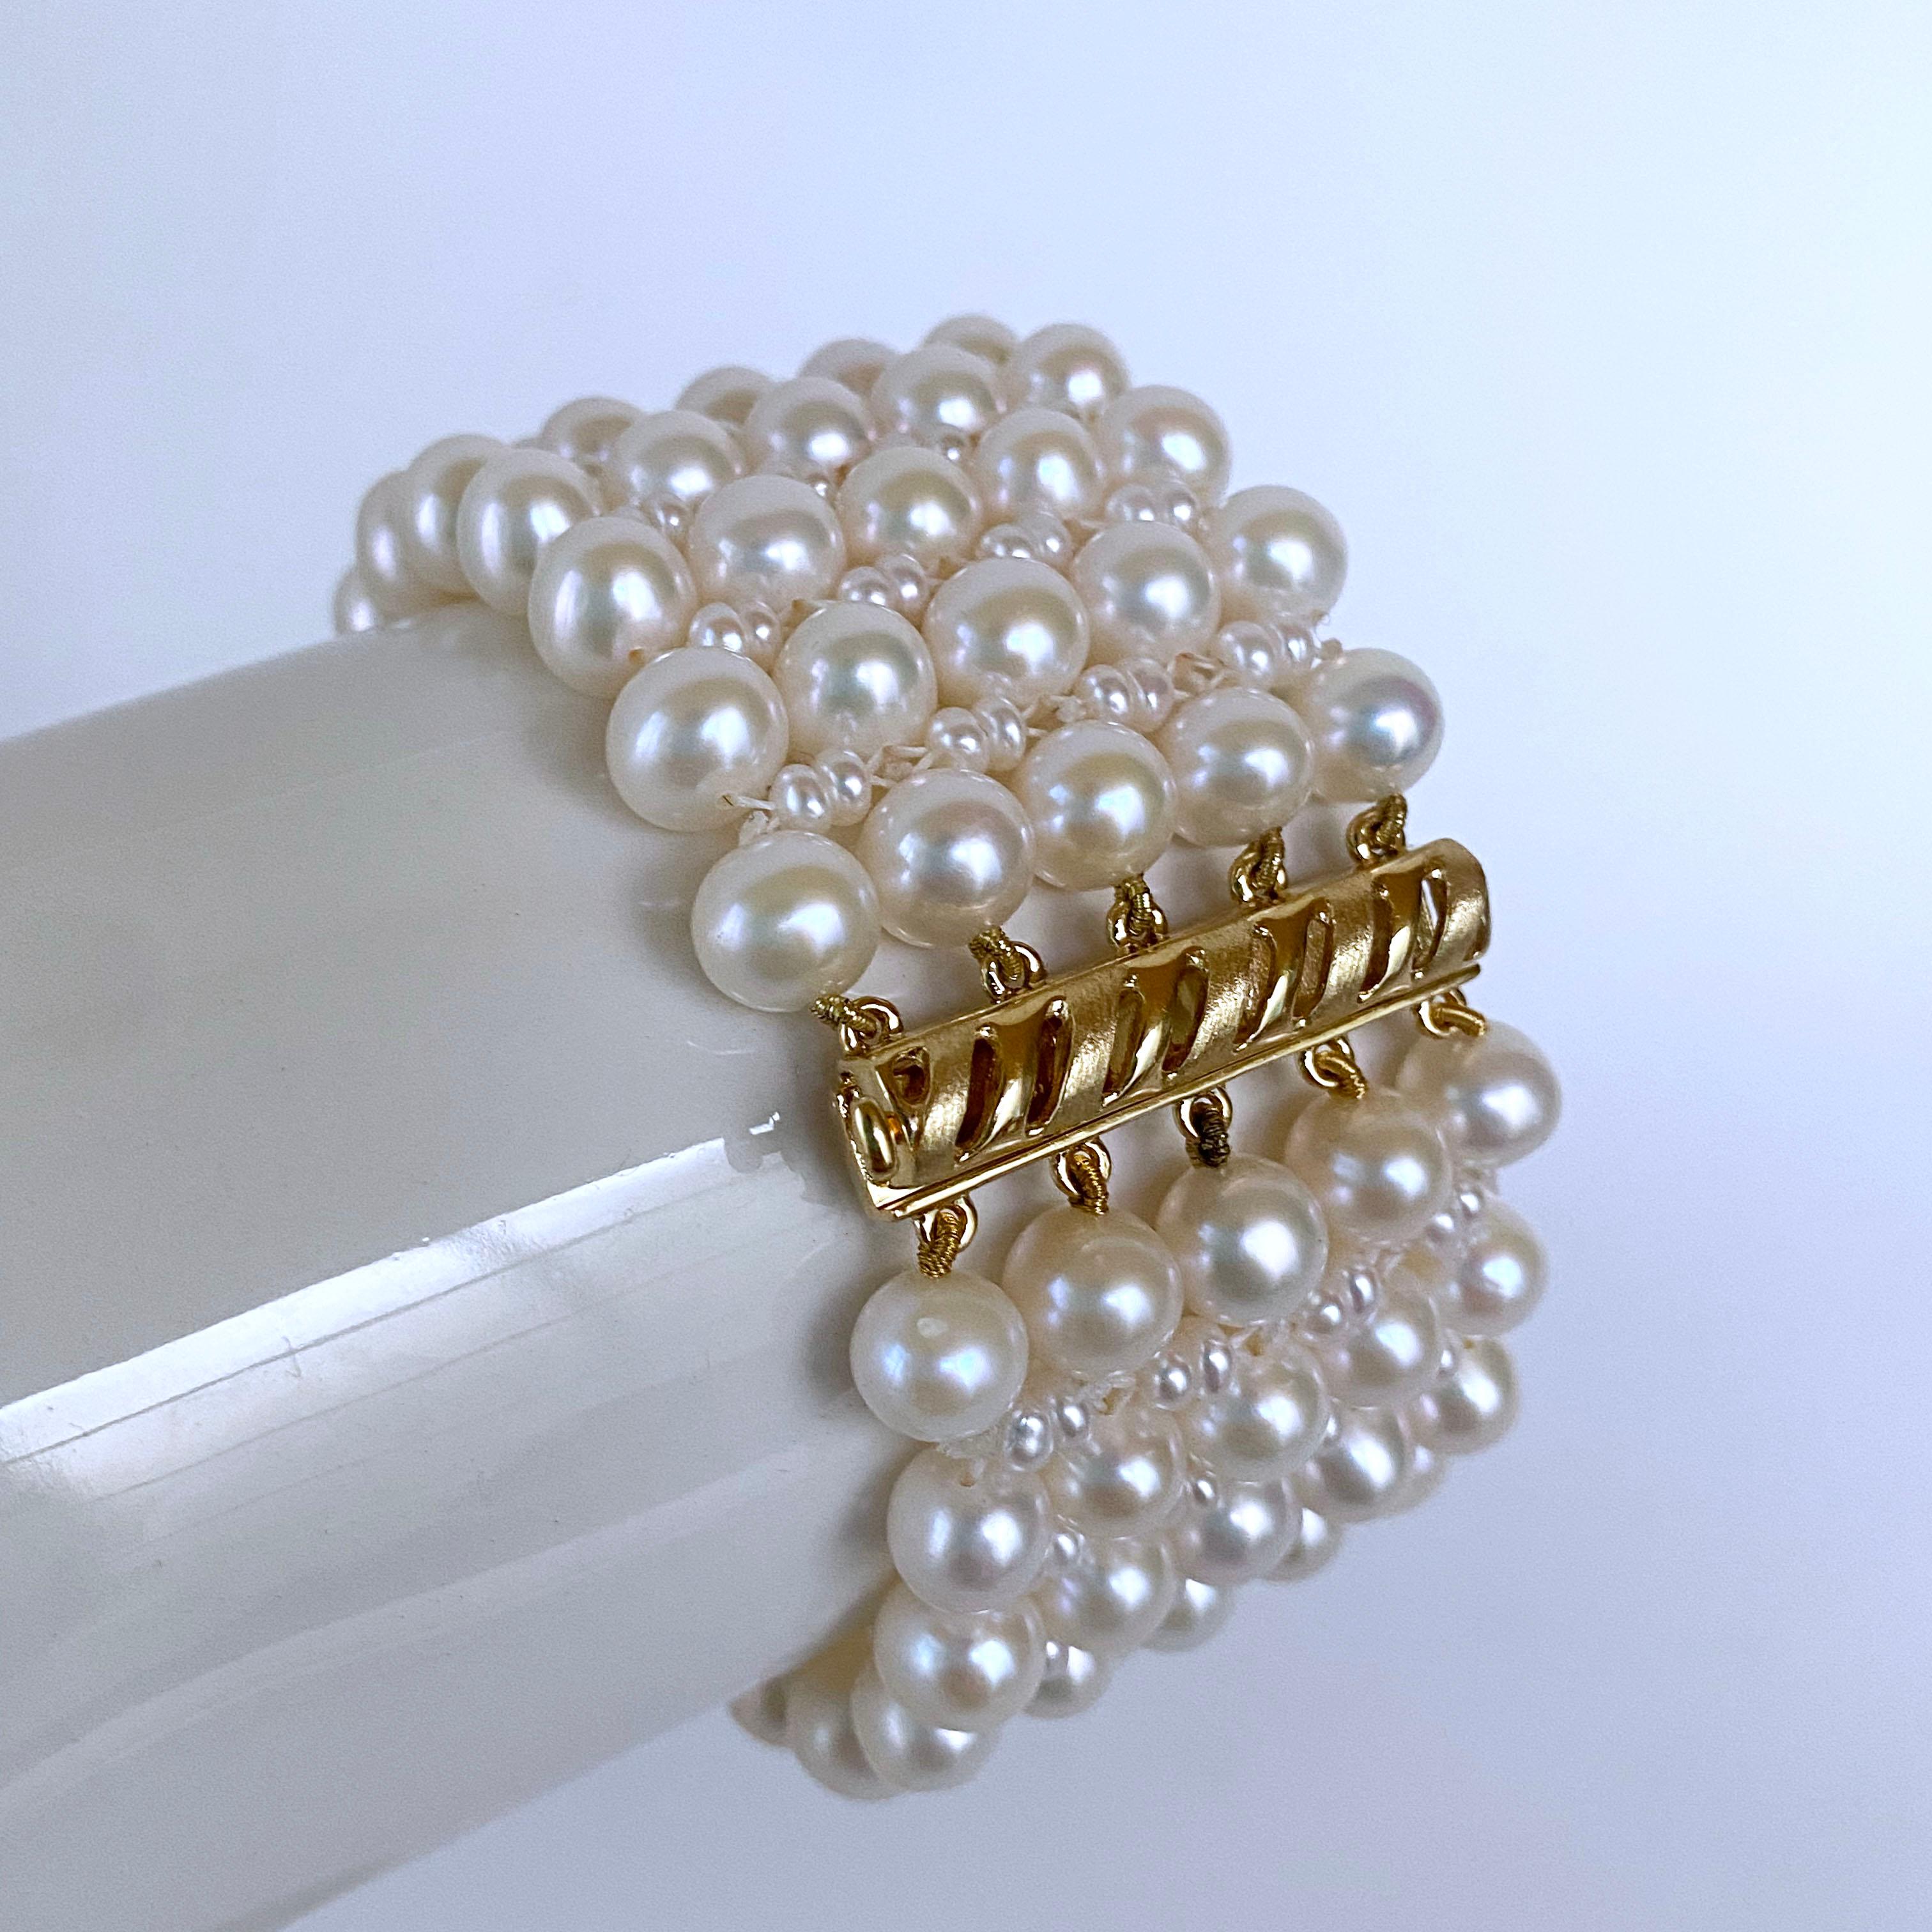 Artisan Marina J. Woven Pearl Bracelet with 14k Yellow Gold Plated Silver Sliding Clasp For Sale